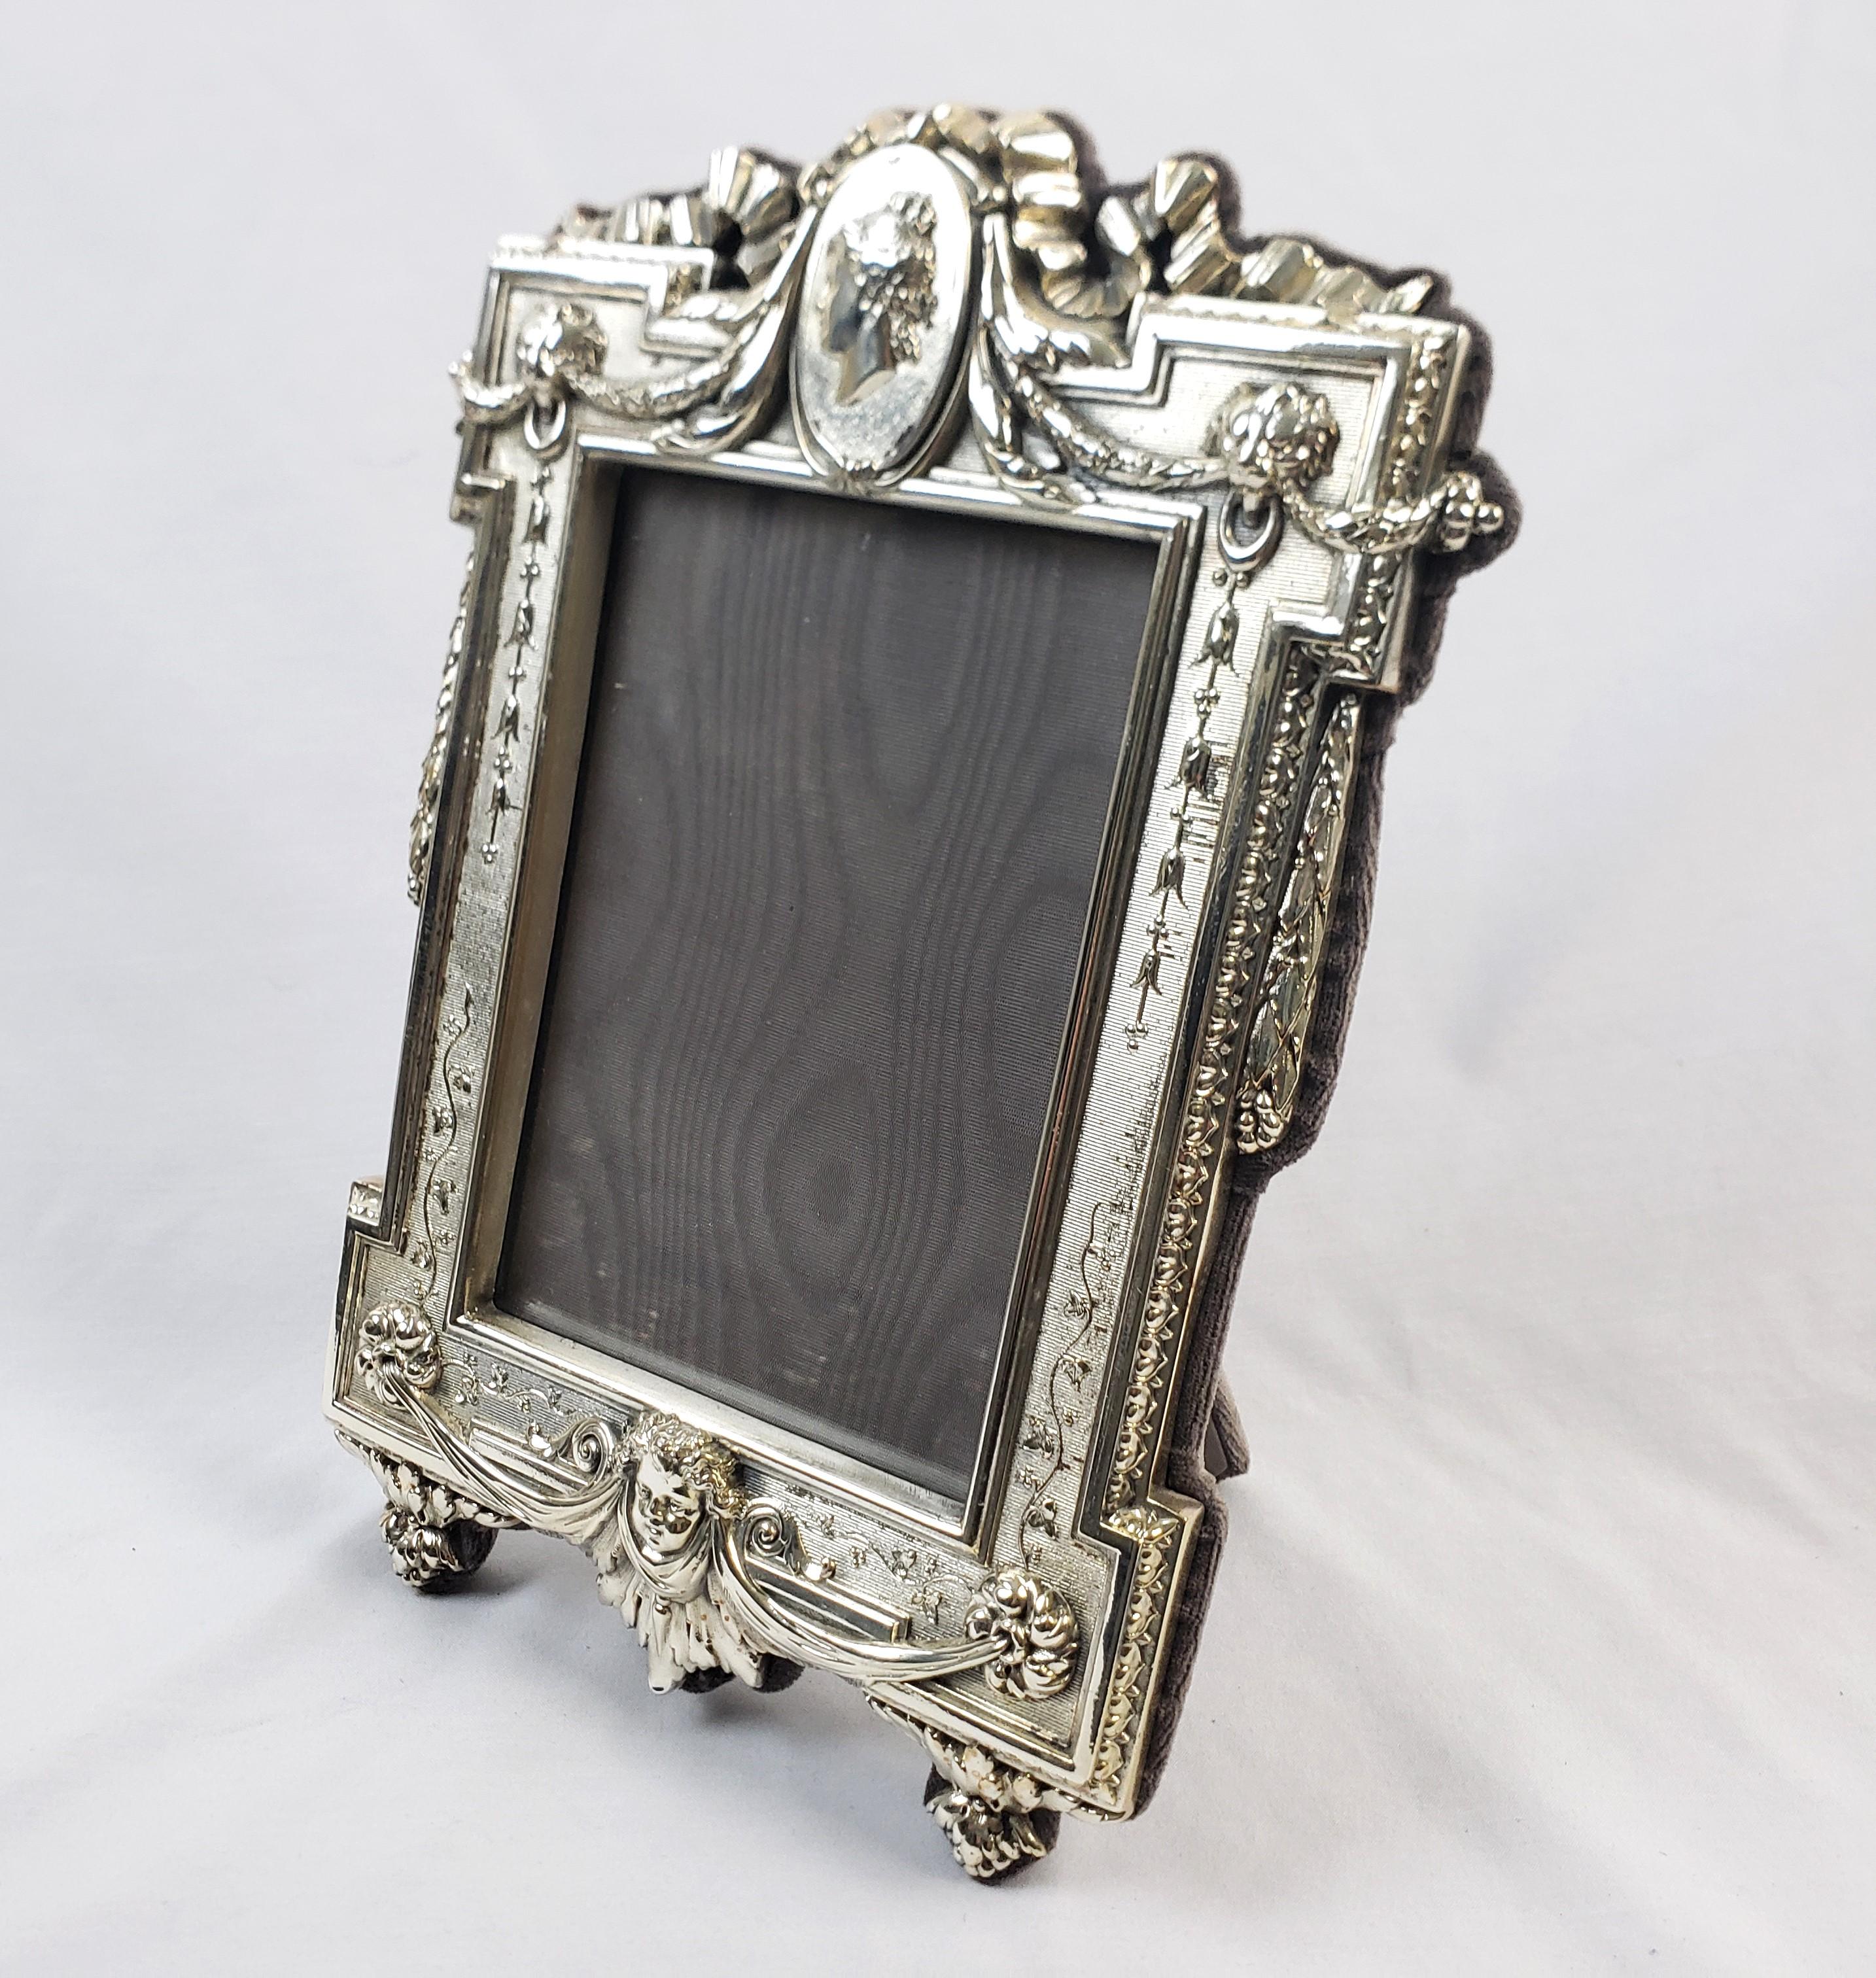 Gothic Revival Vintage Italian Sterling Silver Picture or Mirror Frame with Ornate Gothic Motif For Sale